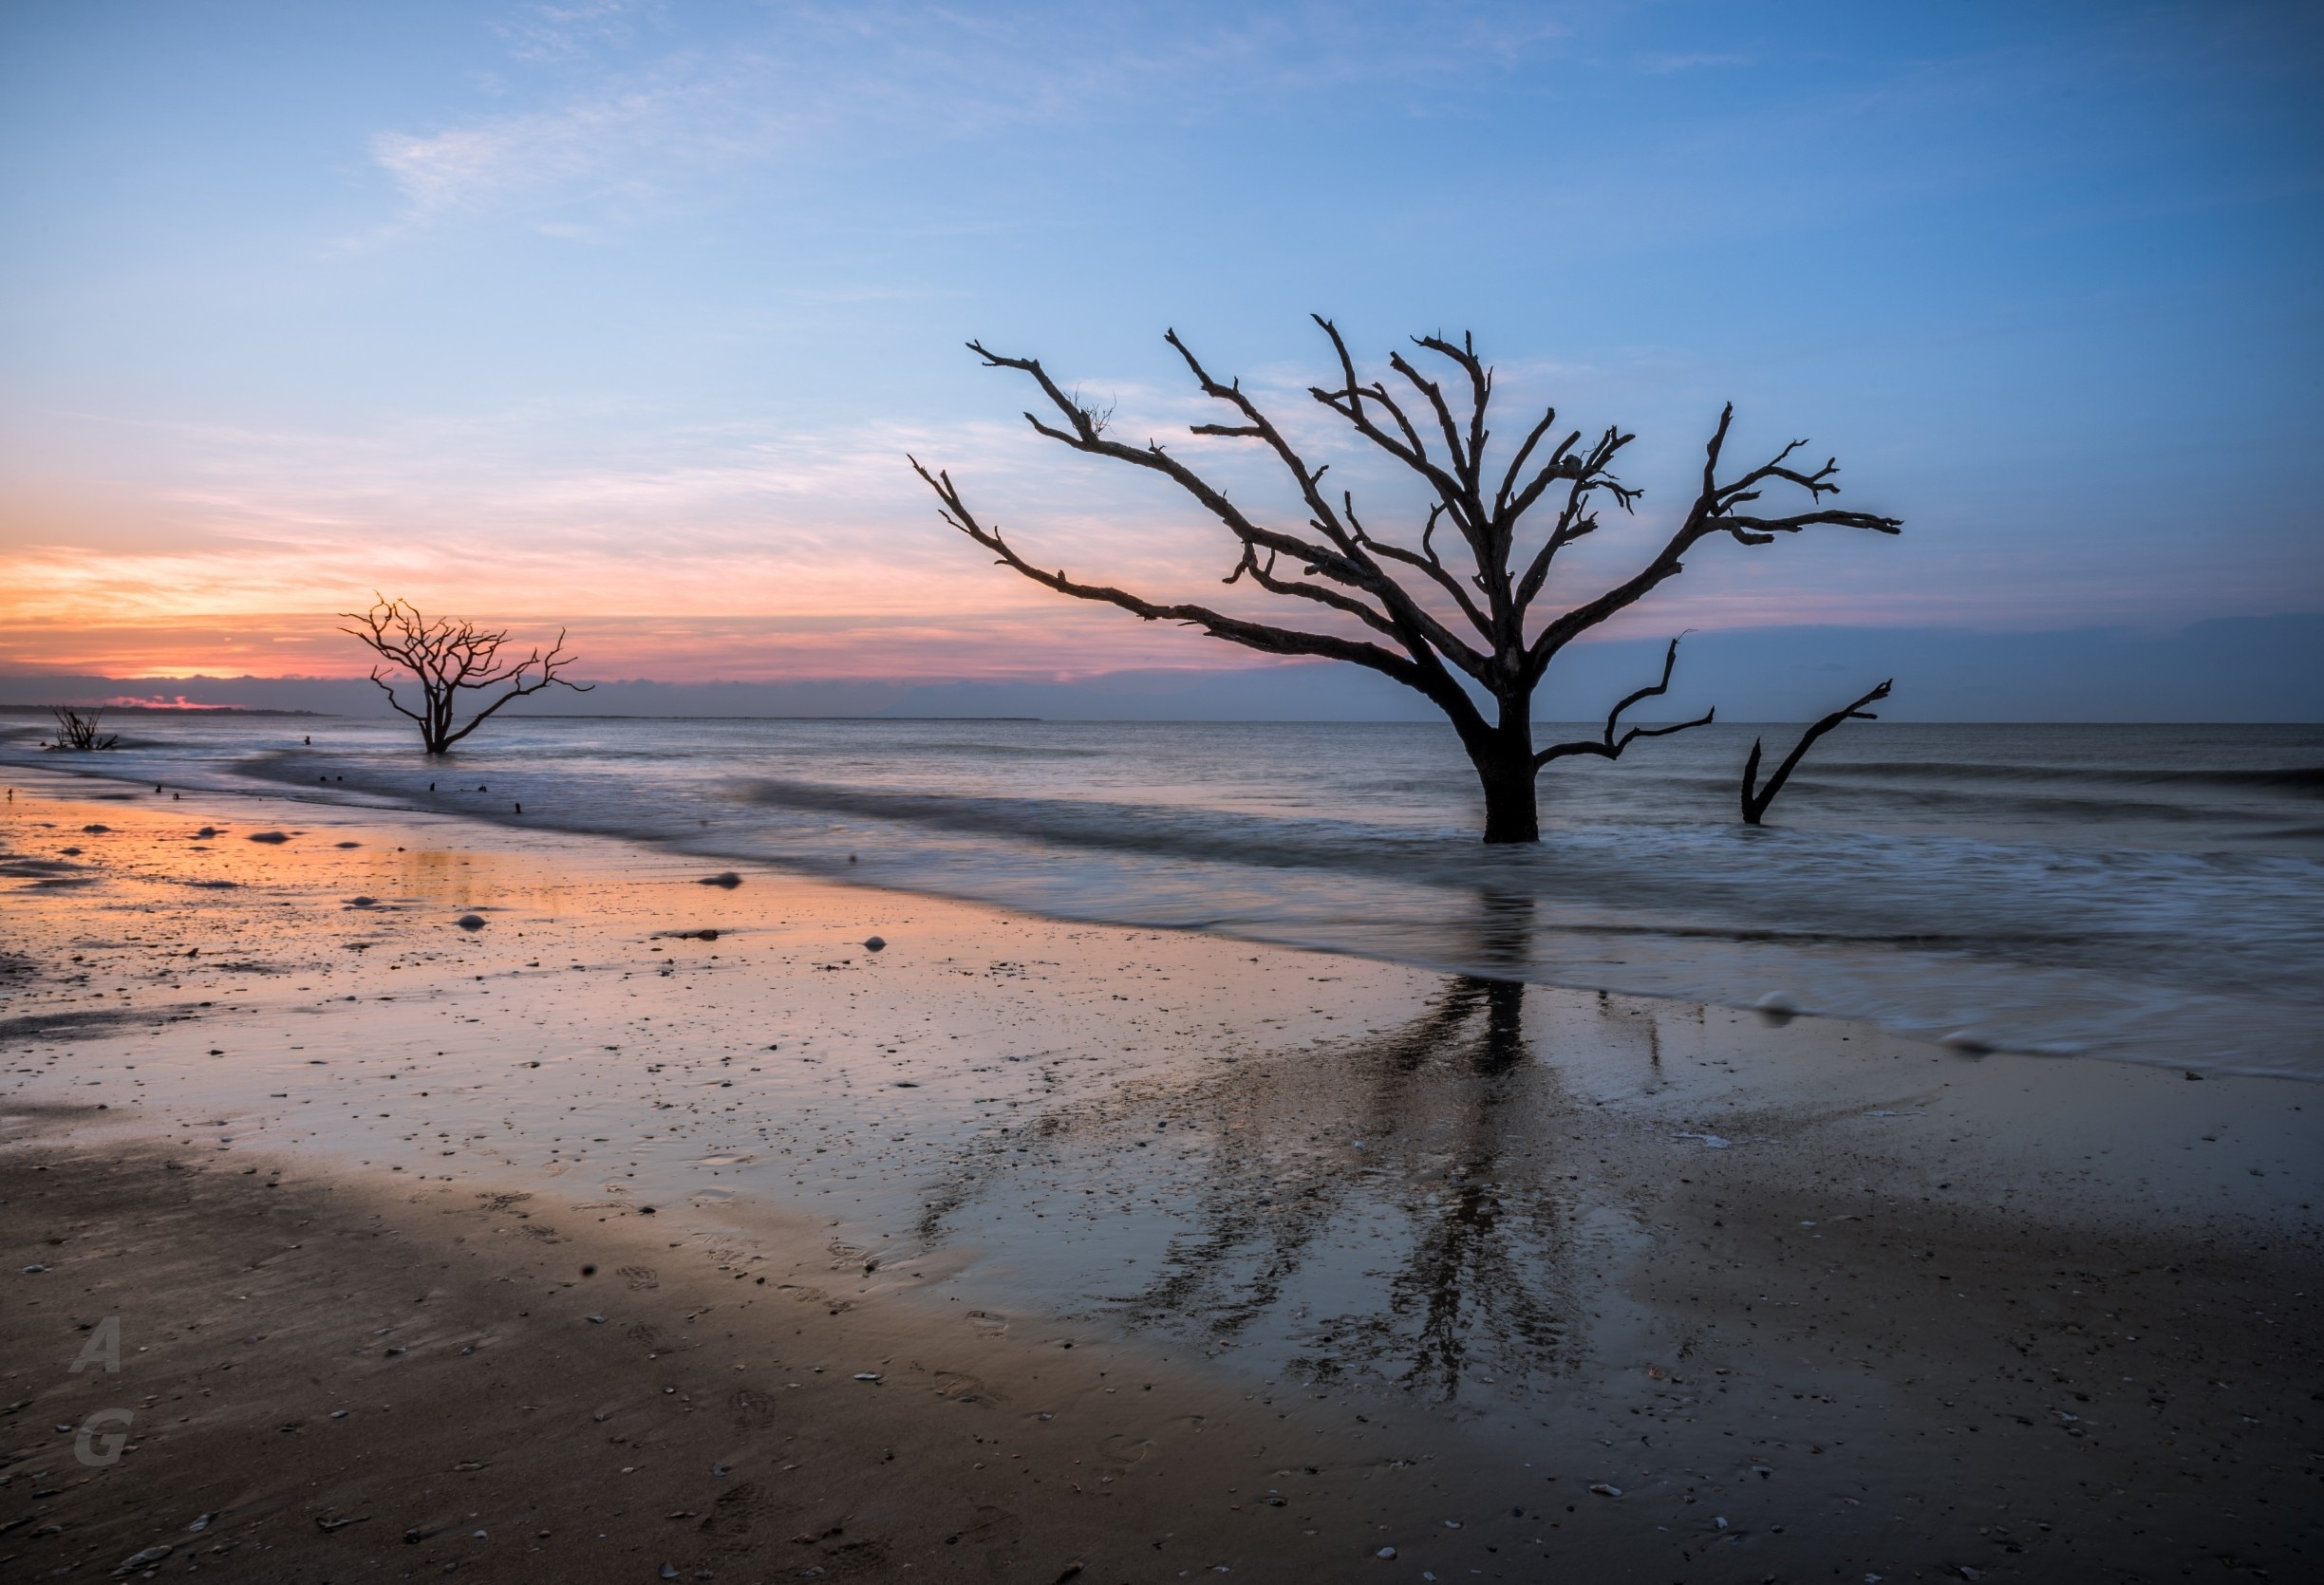 A very early morning outing at Botany Bay on Edisto Island. I had to start from my hotel at 3 AM to make it to this location before dawn. 

Botany Bay Plantation is a nature preserve and has regulated visitor hours. Gates open 30 minutes before sunrise - I wish they'd open a little sooner as the golden hour is pretty much more than half way done by the time one can make it to the beach. Nevertheless, it's a great location to visit at sunrise, especially if there are high clouds to add drama. Recommended to visit when the tide is ebbing as you then get the shadows of the trees, which to my eyes add more depth to the image. 

On this day, there was a bank of low clouds that prevented too much color but it was a great sunrise to witness nonetheless. The trees have so much character and add so much to the image. It's hard to look at the remnants of these trees and not imagine the onslaught they've withstood at the hands of mother nature. 

#WeekendGetAwayForTheFamily #colorful #USA #weekend #treetrove #blue